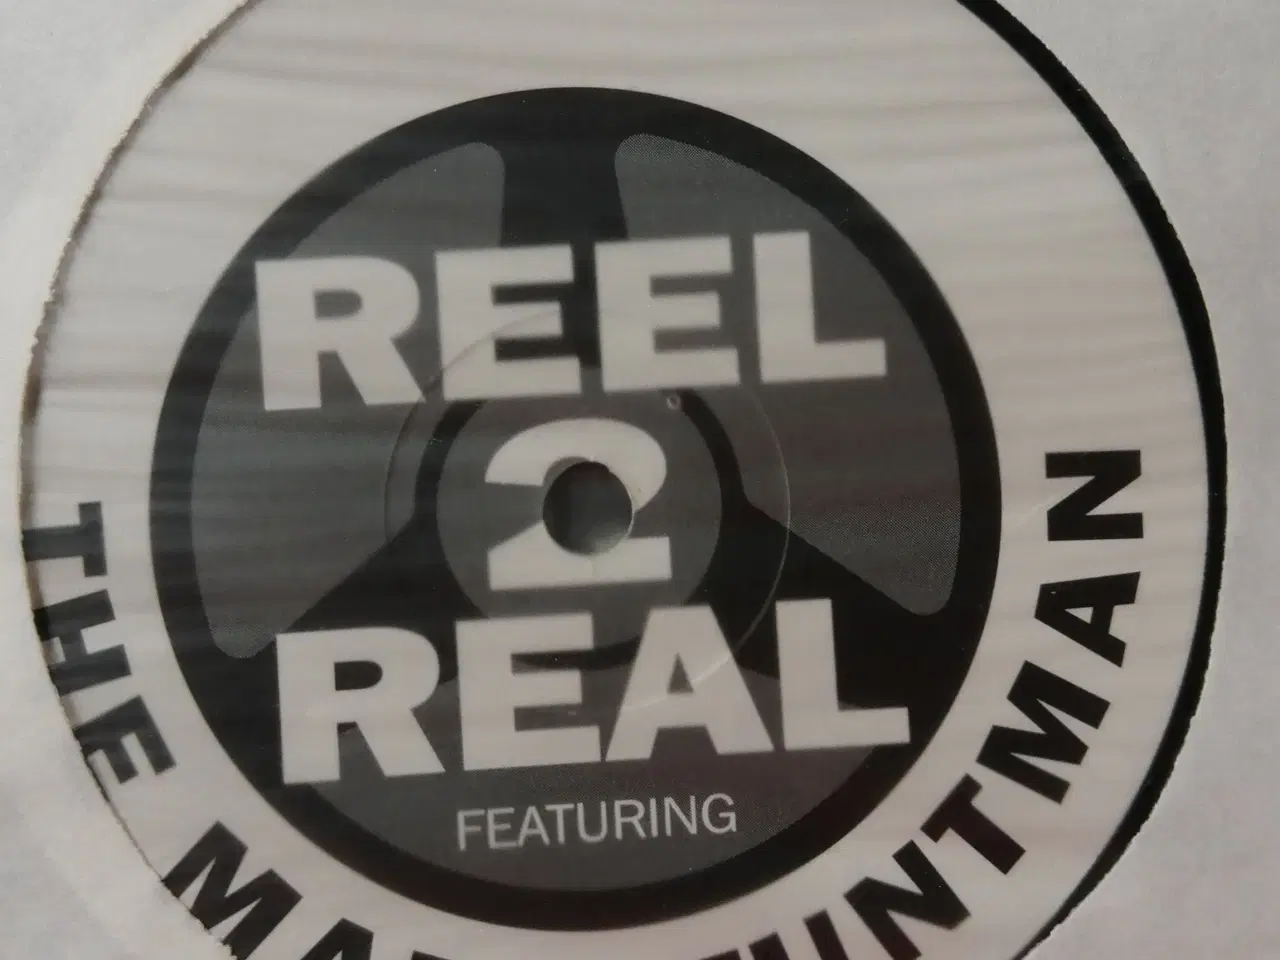 Billede 2 - Reel 2 Real feat The Mad Stuntman